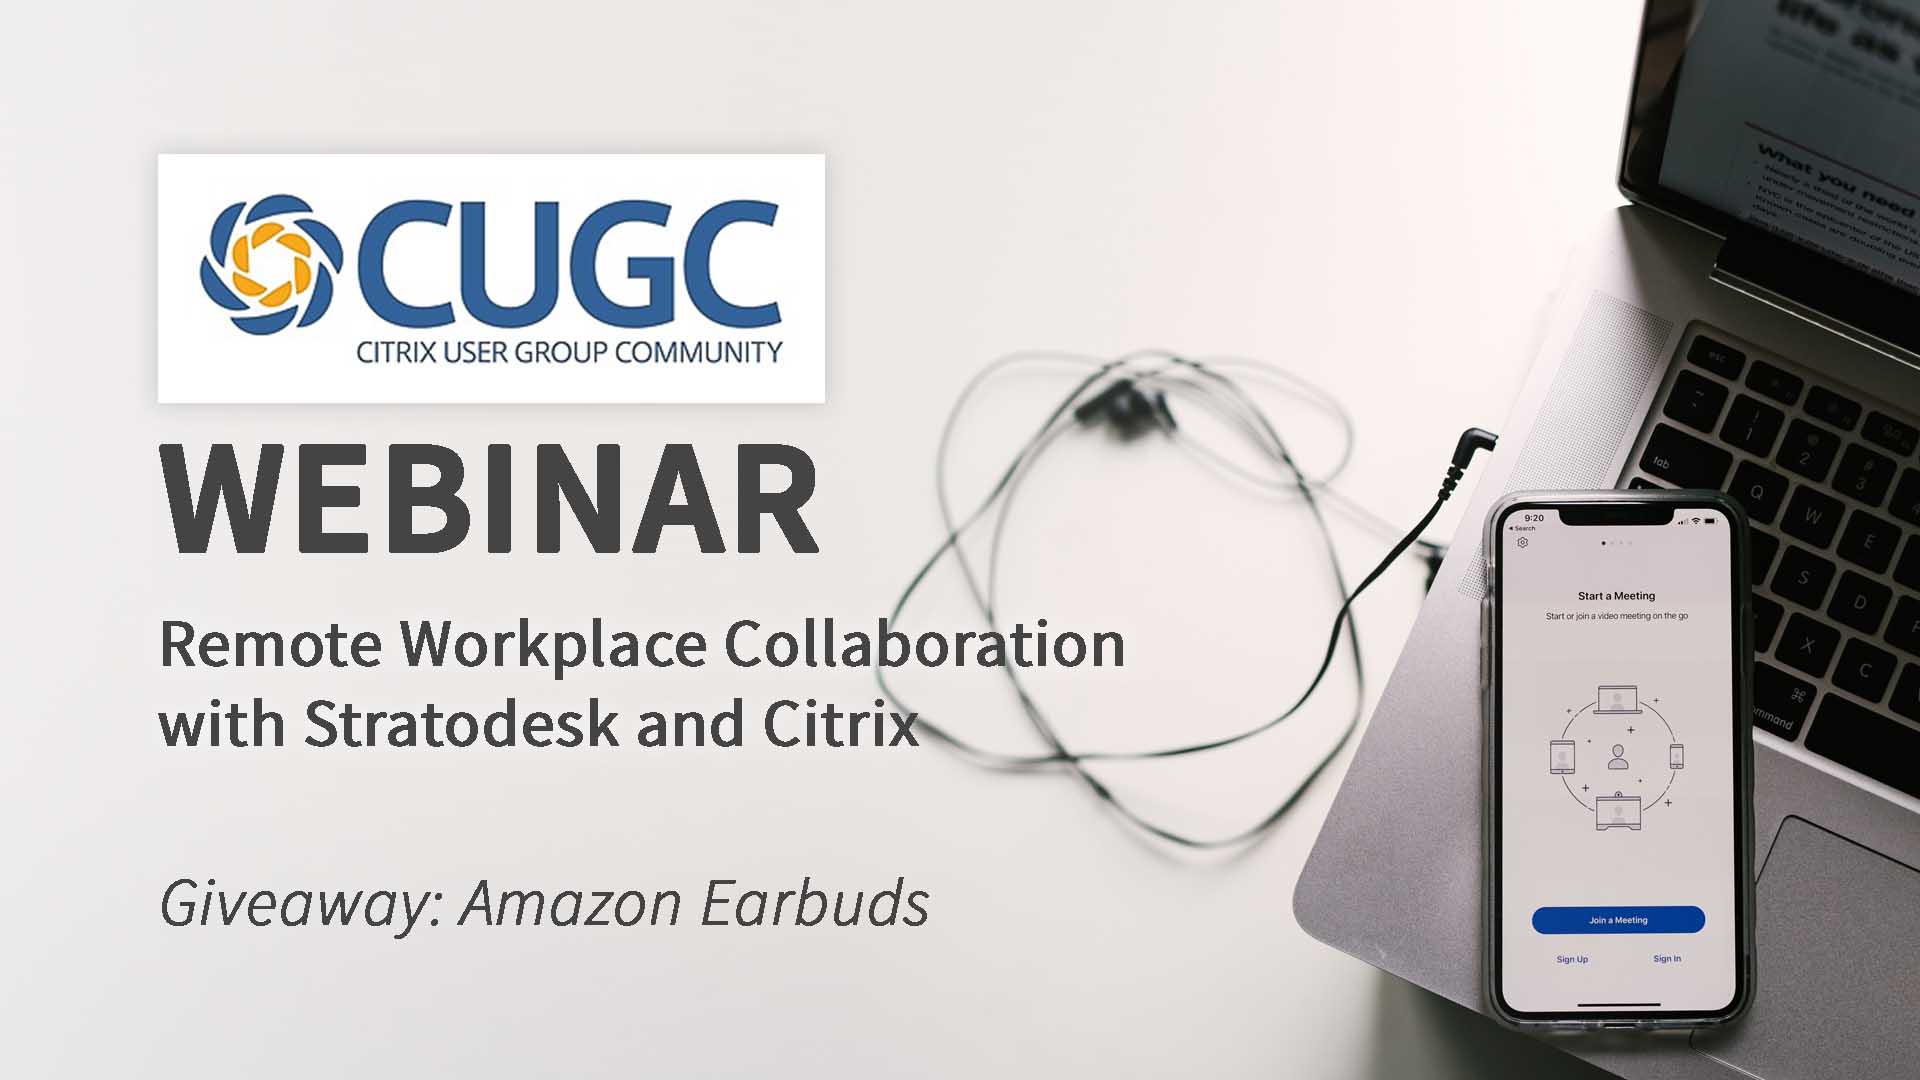 Presented by CUGC and Stratodesk, this webinar is free for all members.